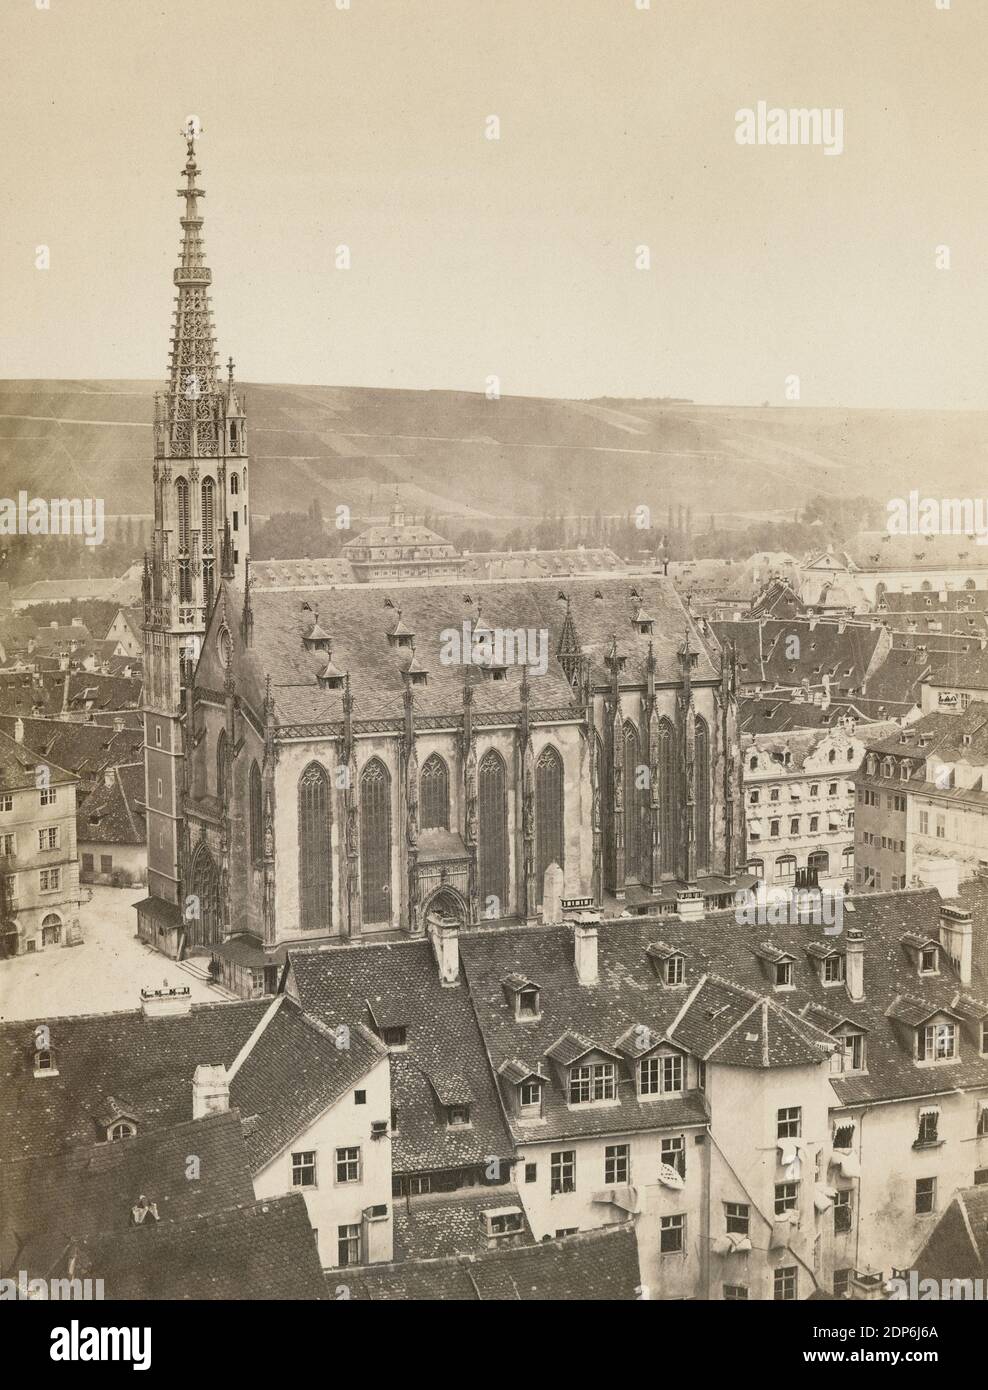 Antique c1863 photograph, Marienkapelle in Würzburg, Germany. Marienkapelle is a Roman Catholic church located at the Unterer Markt (market square) of the town. SOURCE: ORIGINAL PHOTOGRAPH Stock Photo